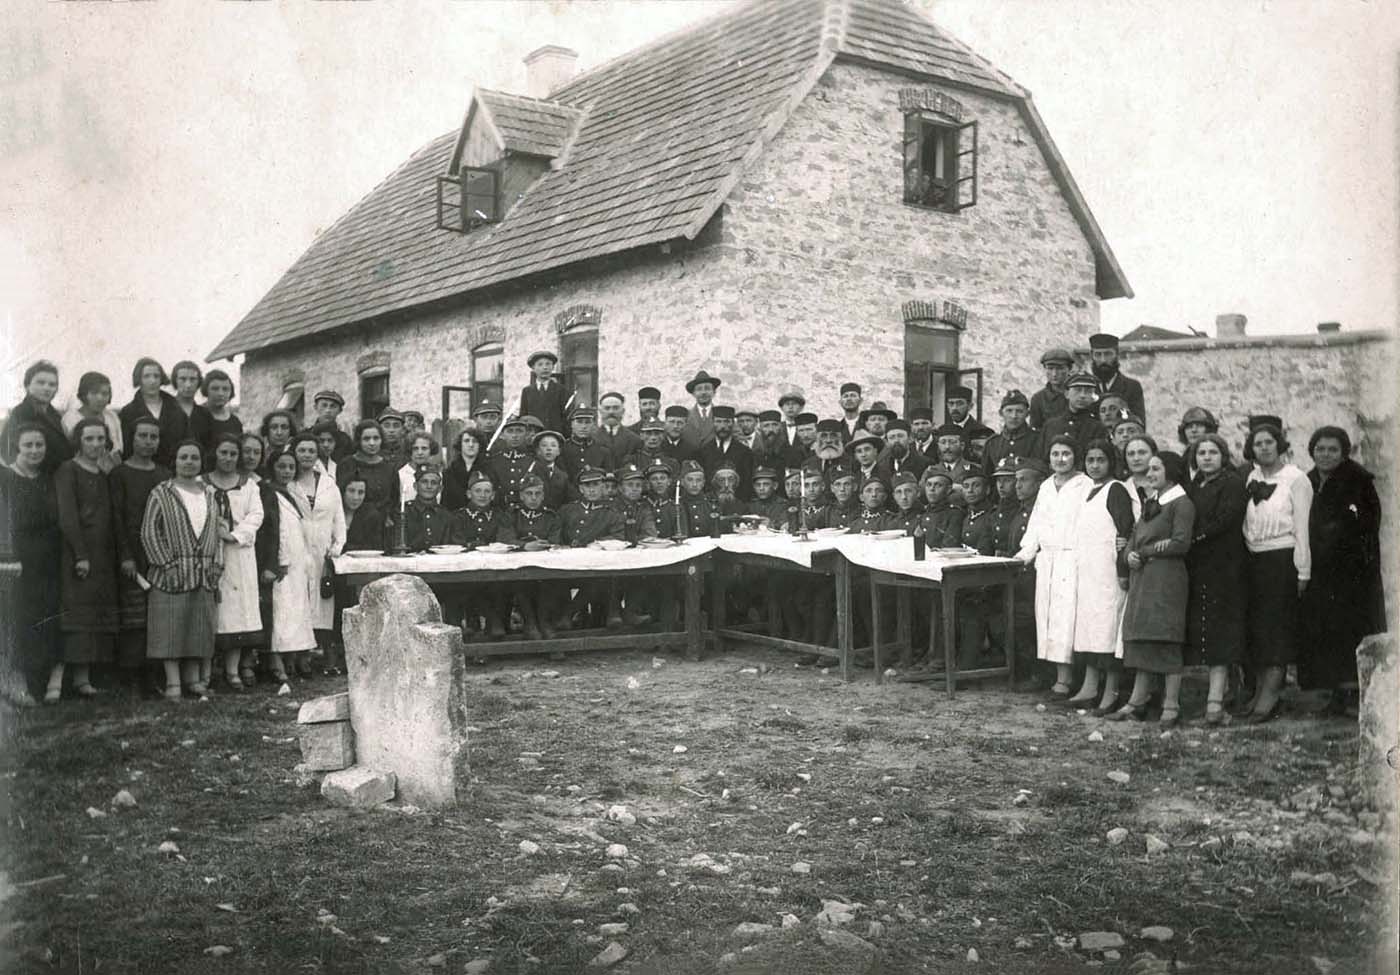 A group photo of Jewish soldiers and community members at a Passover Seder arranged by the community, Staszow, Poland,  prewar